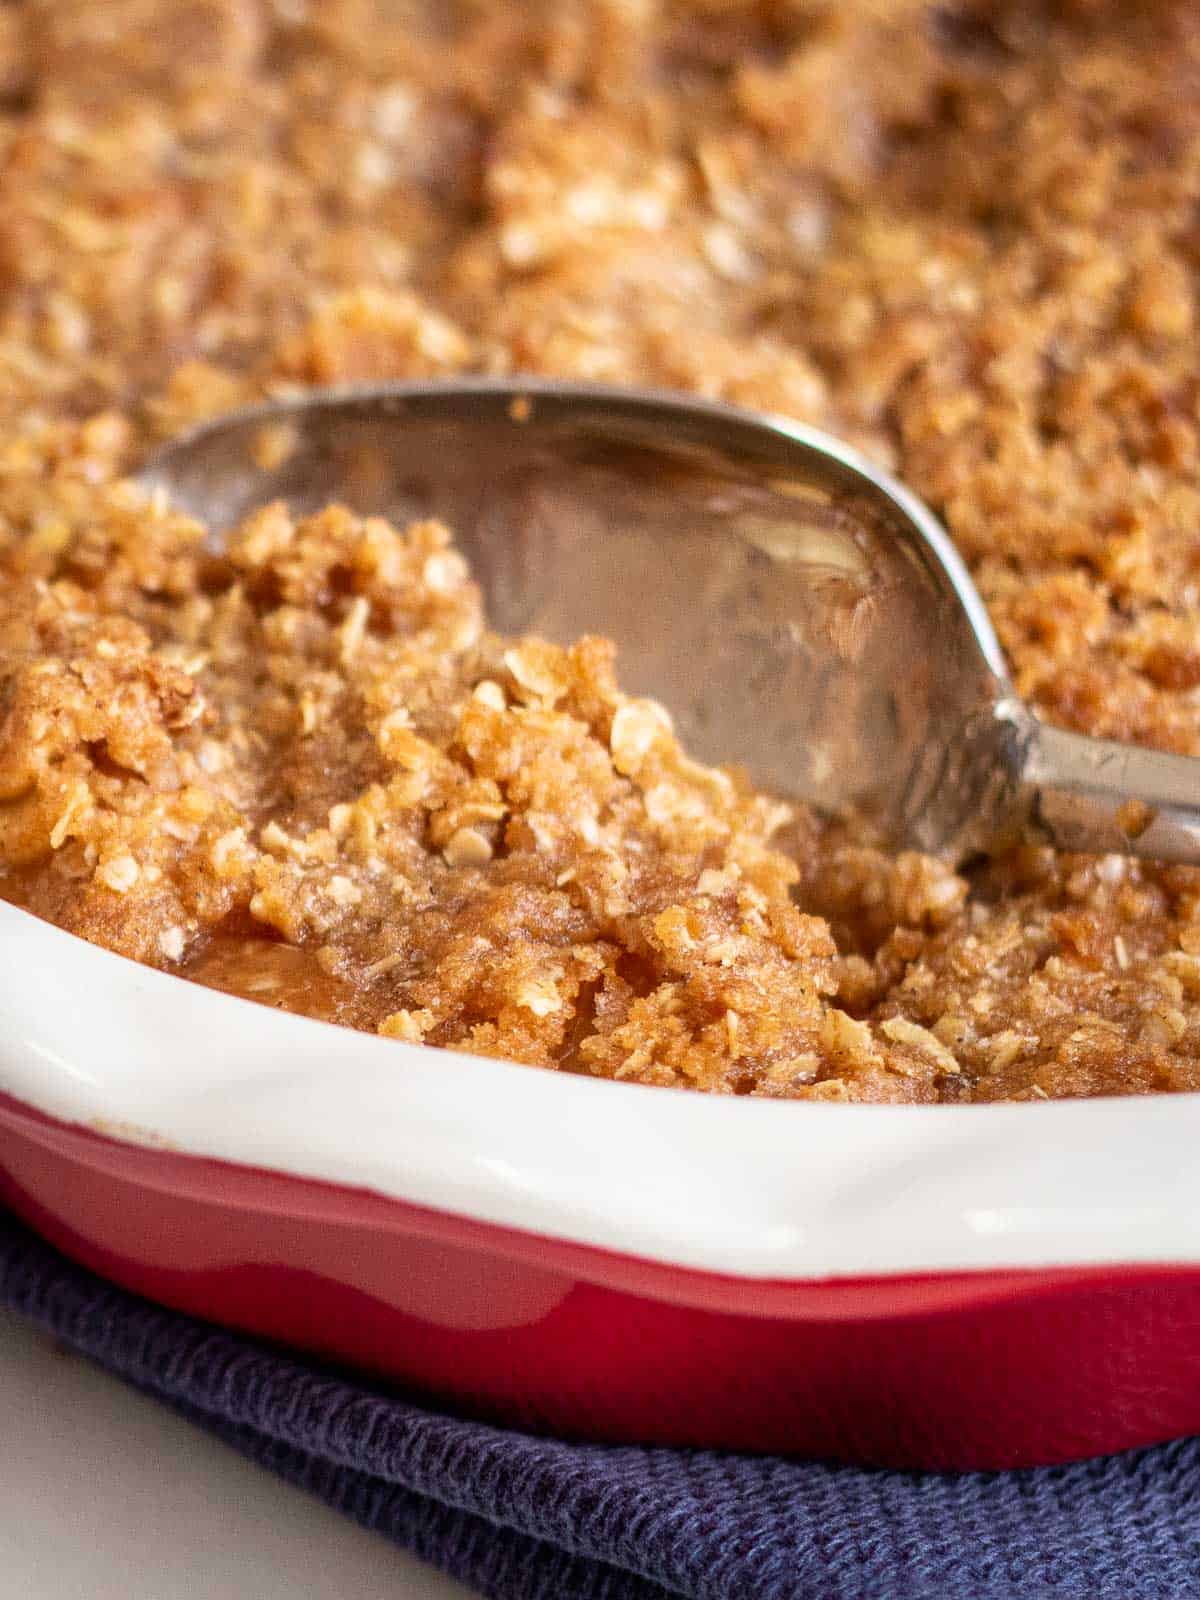 Image showing baked Apple Crisp with serving spoon.